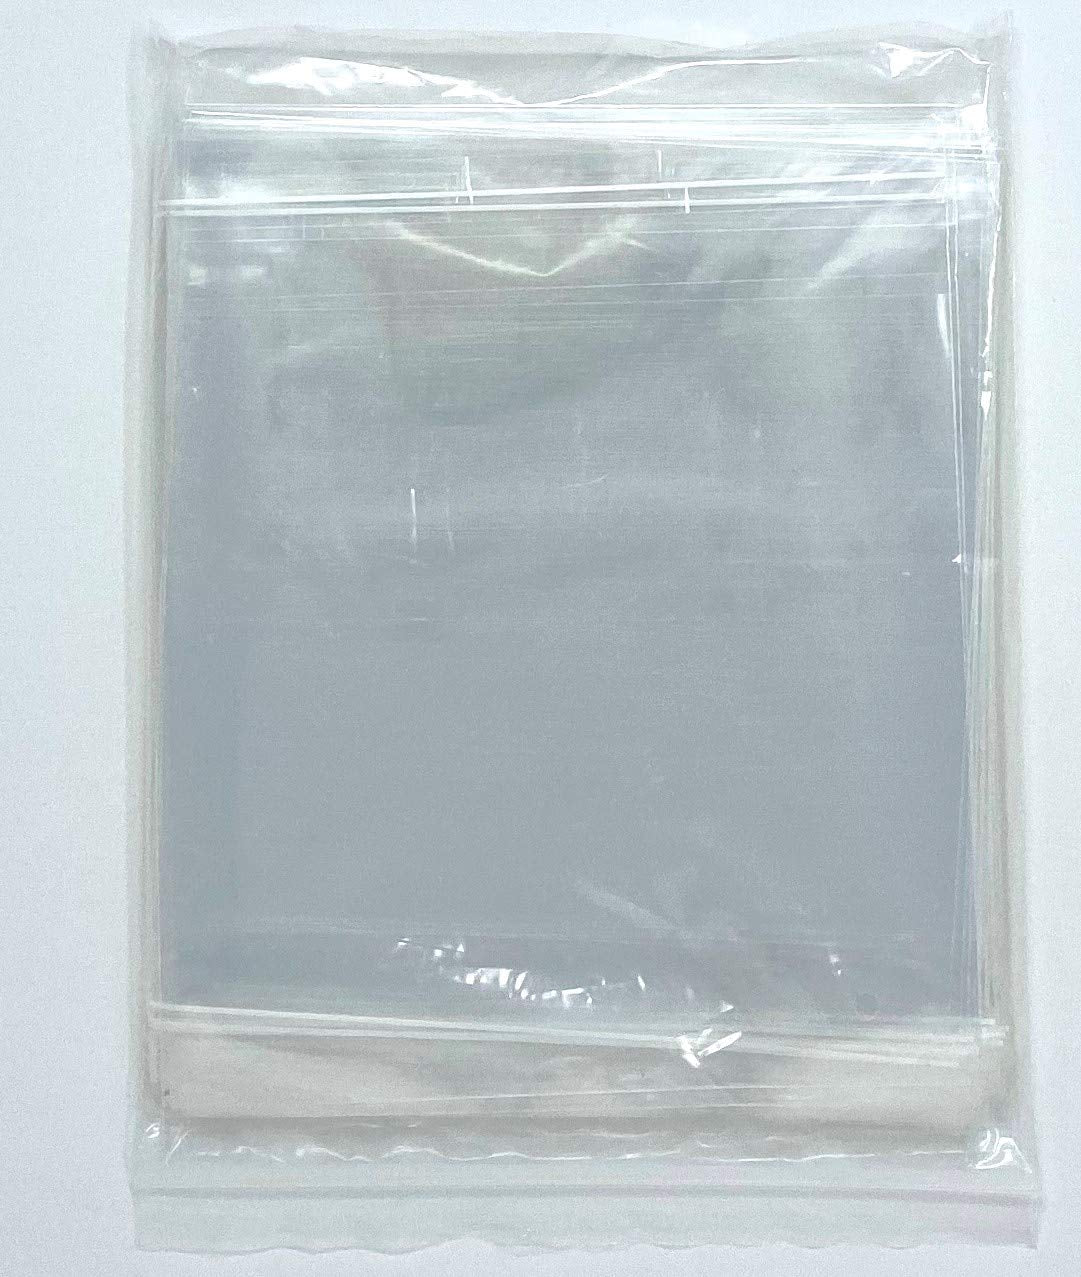 6 inchesx6 inches Cello Bags - Cellophane Greeting Card Display Bags 36 Micron Self Seal - 160mm x 160mm and 35mm Flap (100)